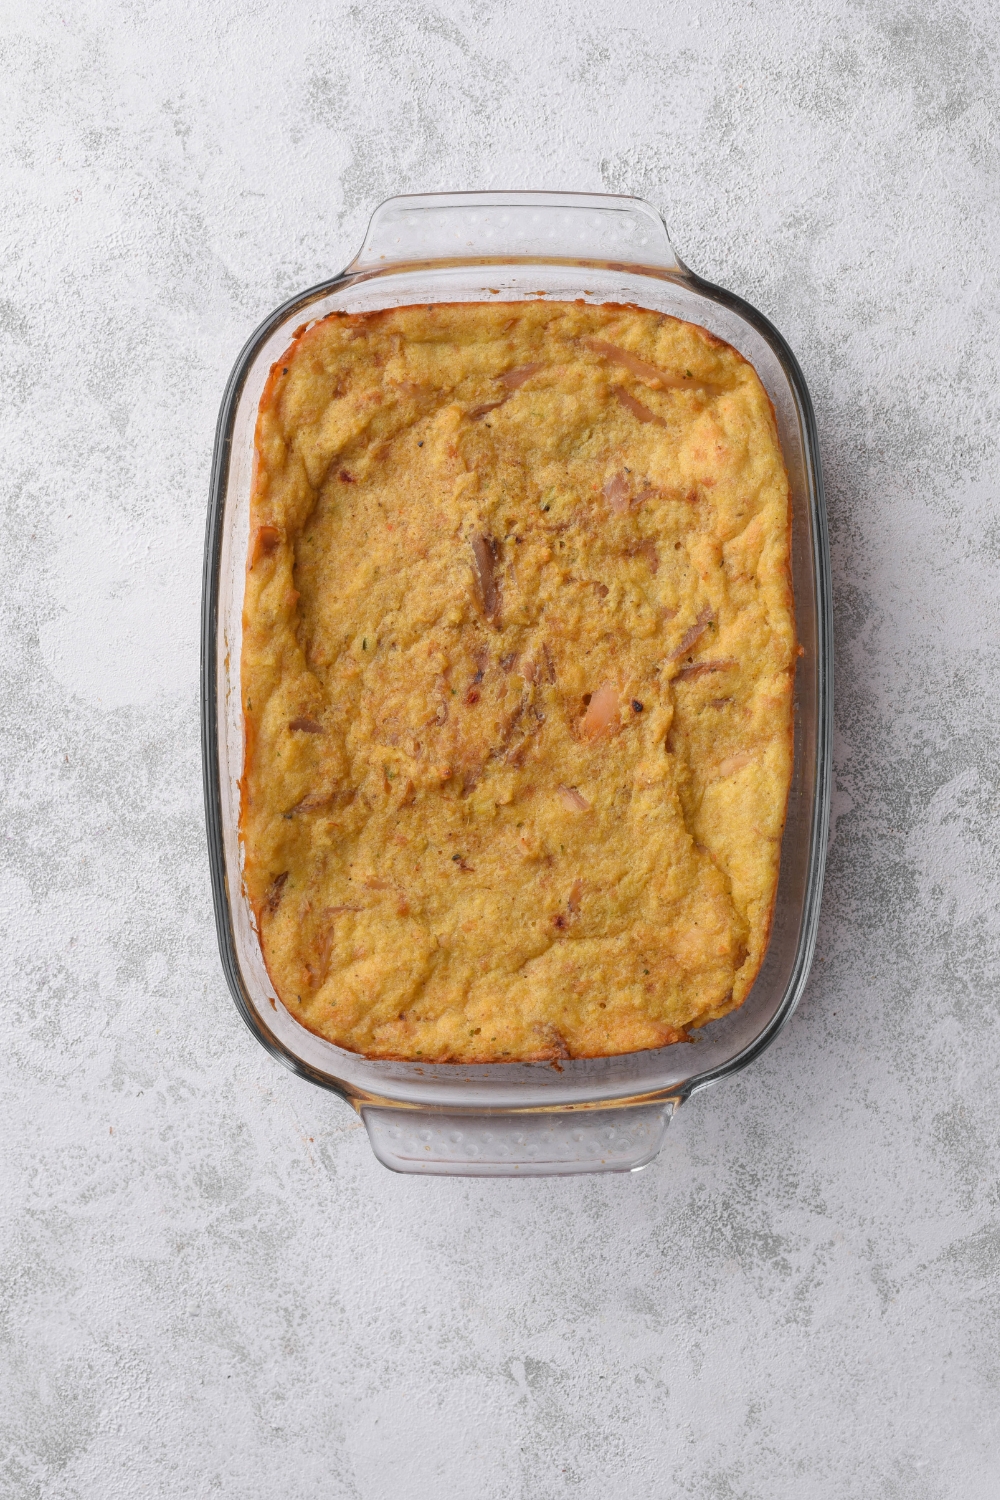 A clear baking dish filled with freshly baked casserole.